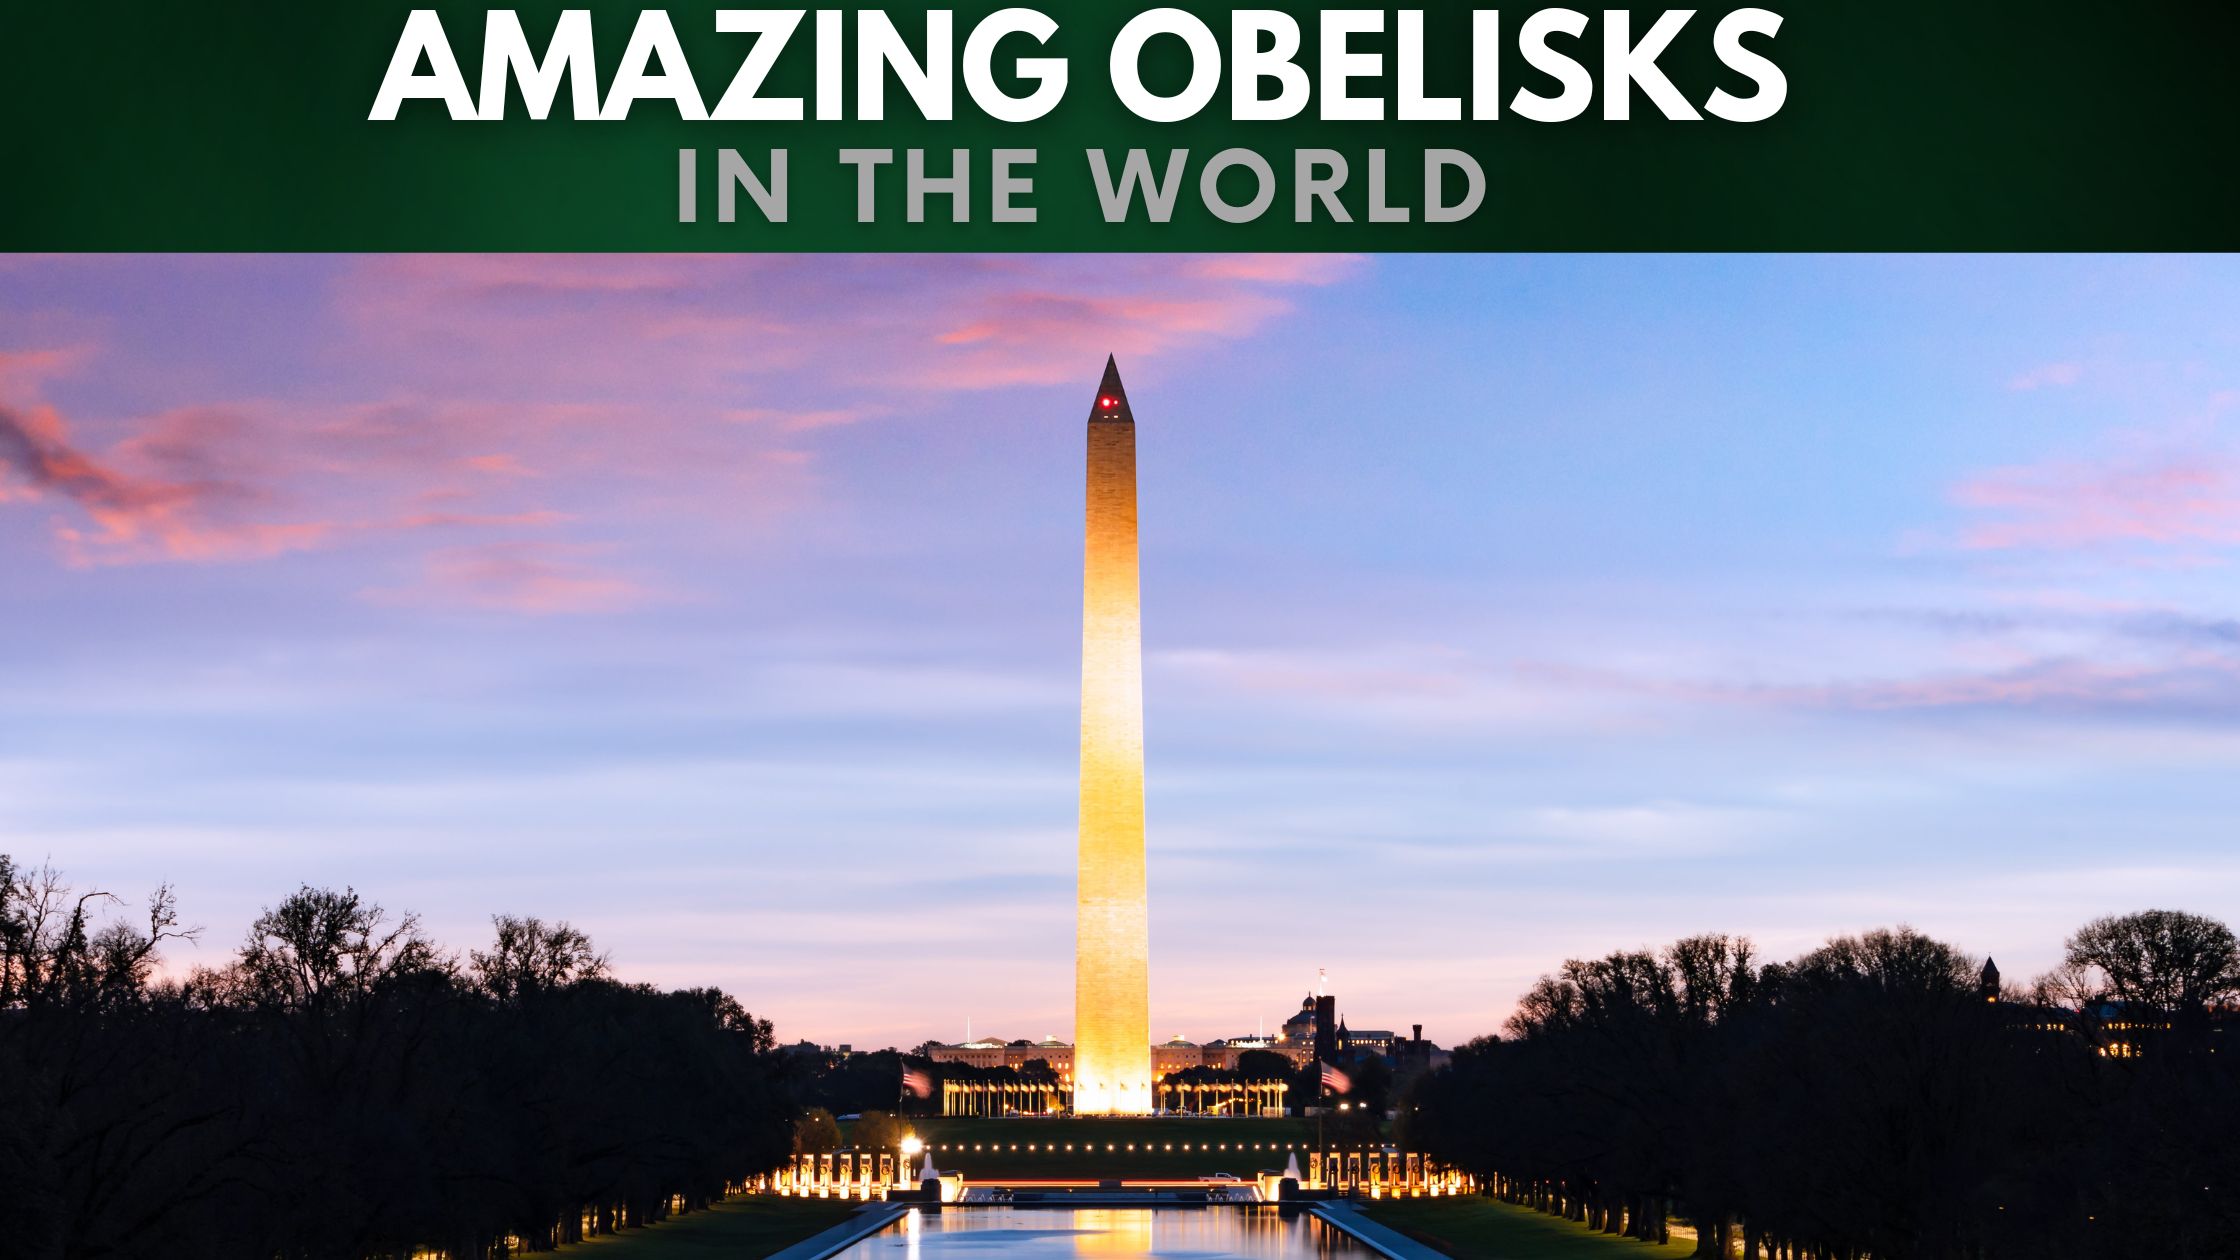 Most Amazing Obelisks In The World (Top 10)